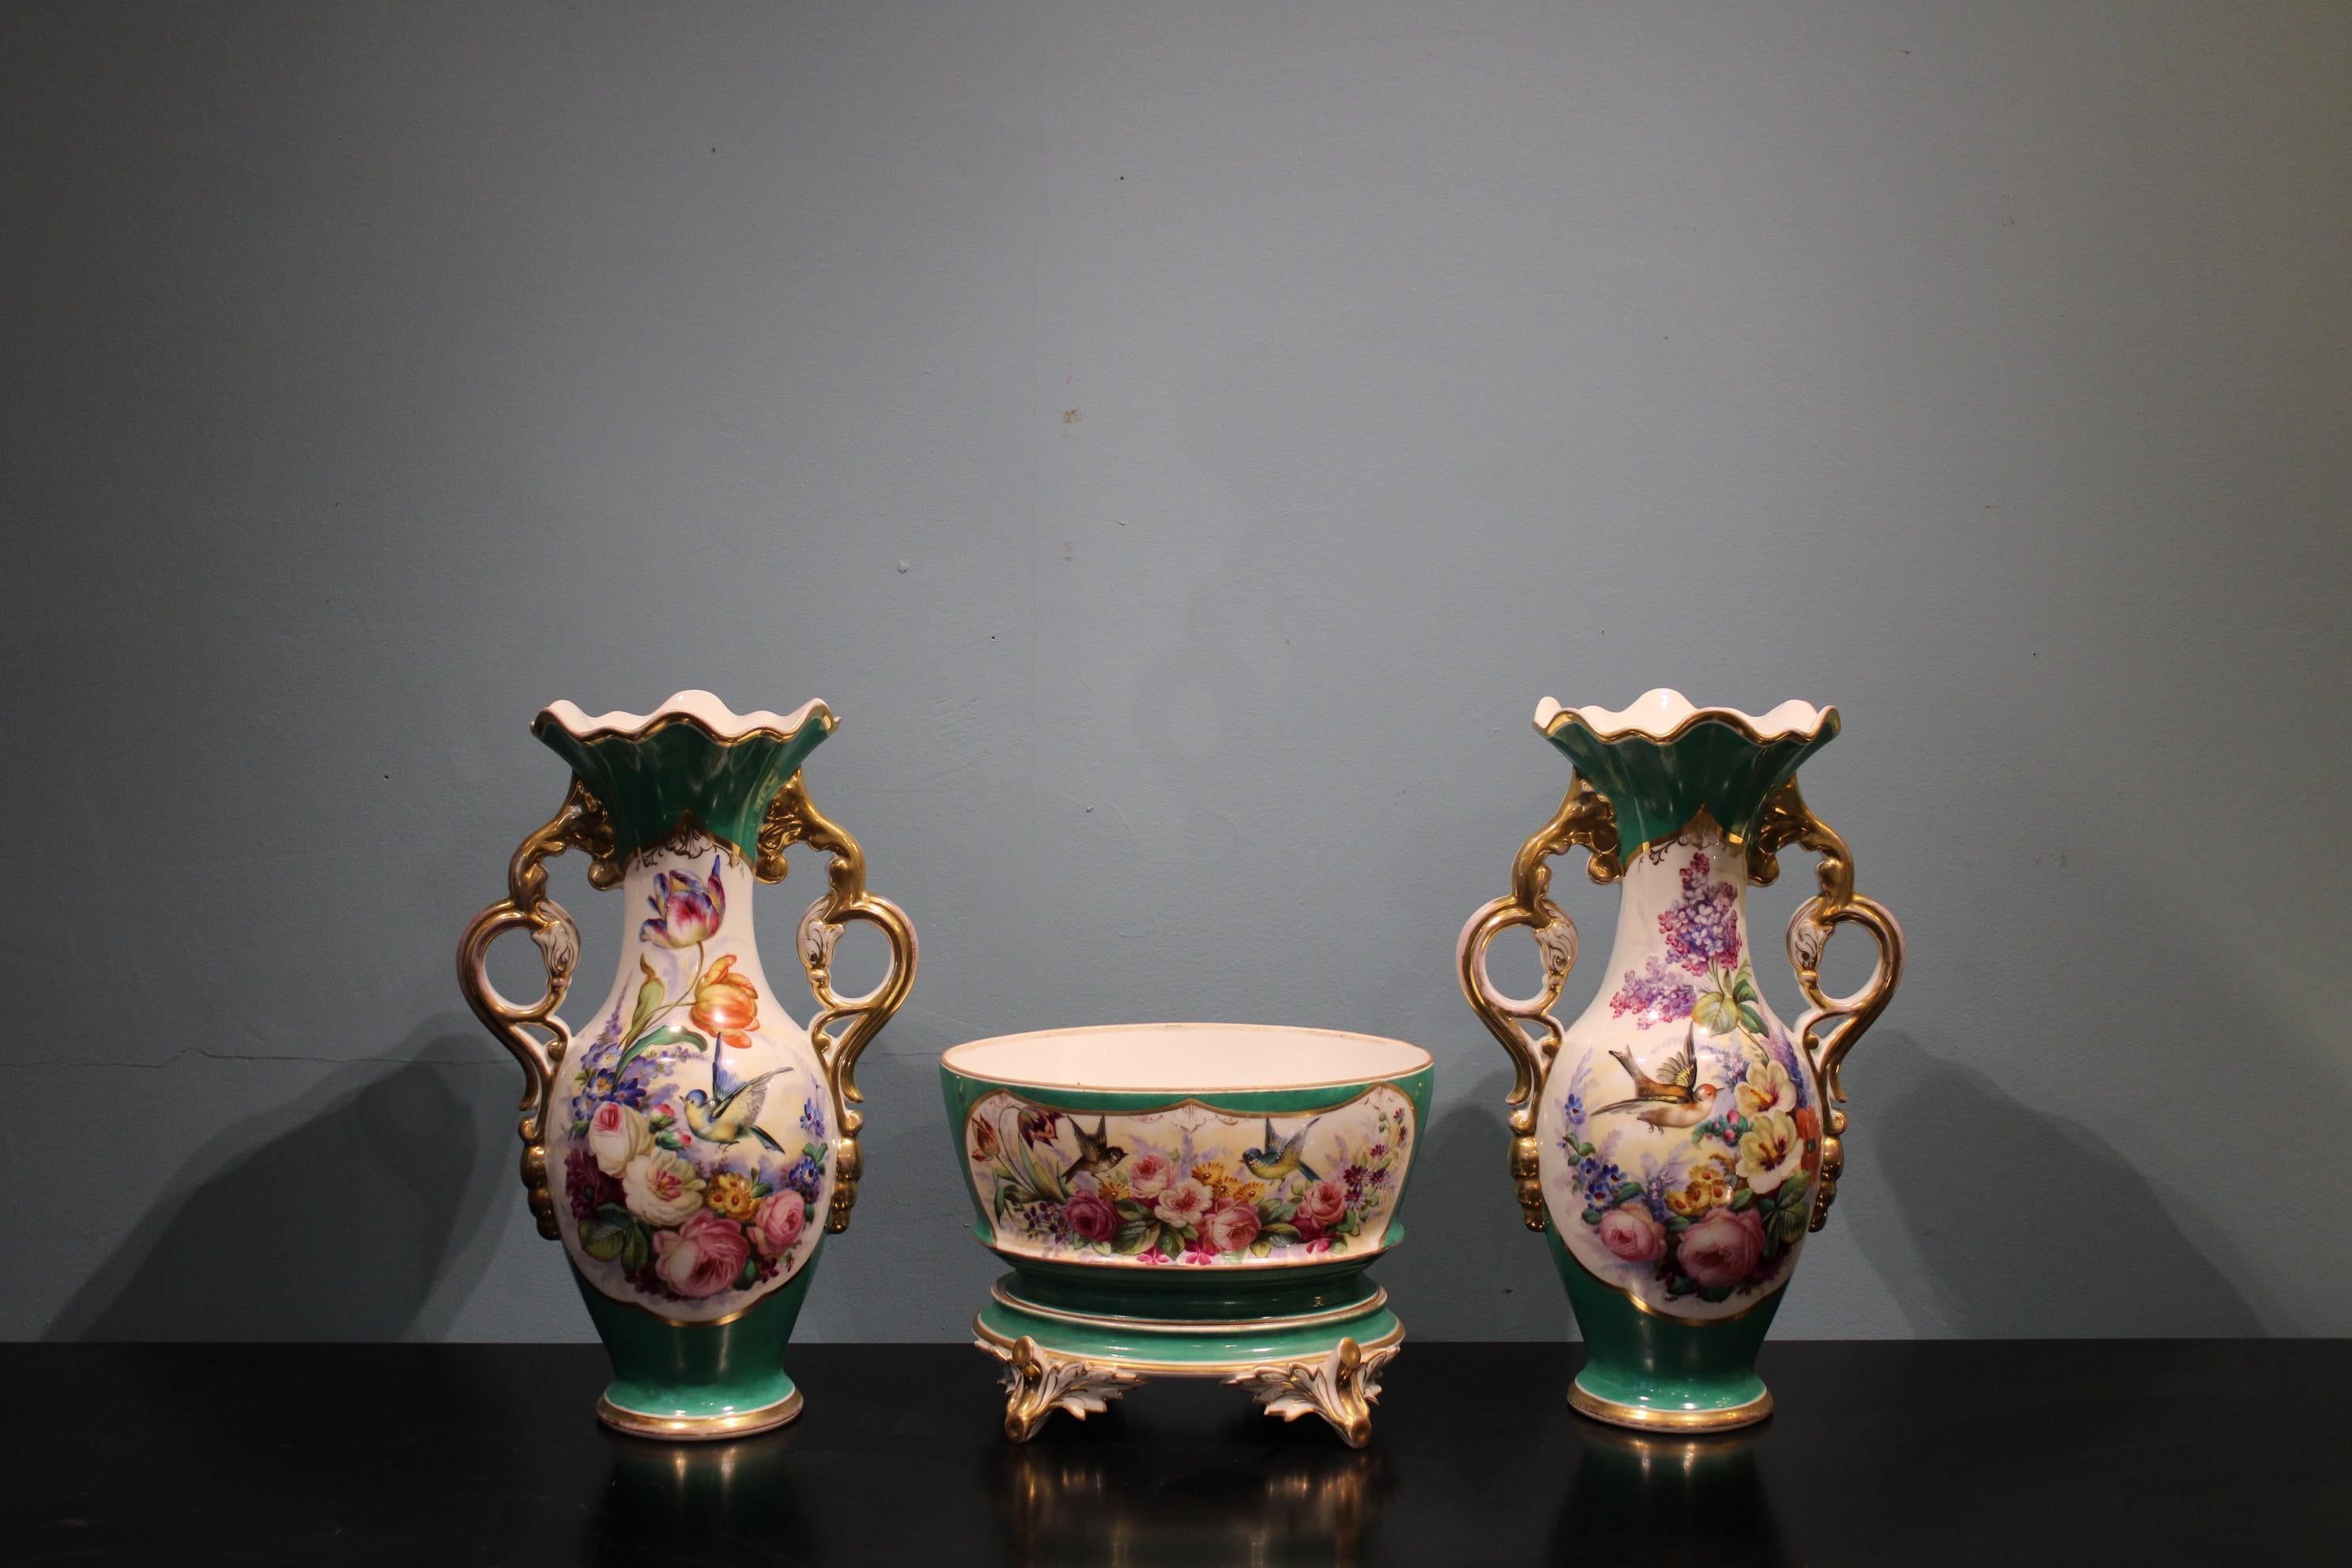 Porcelain trim, circa 1900. 
Vases dimensions : height 43 x lenght 28 x width 18 cm
Bol dimensions : height 21.5 x lenght 29.5 x width 19.5 cm
Noted : 3 ceramic firing accidents.